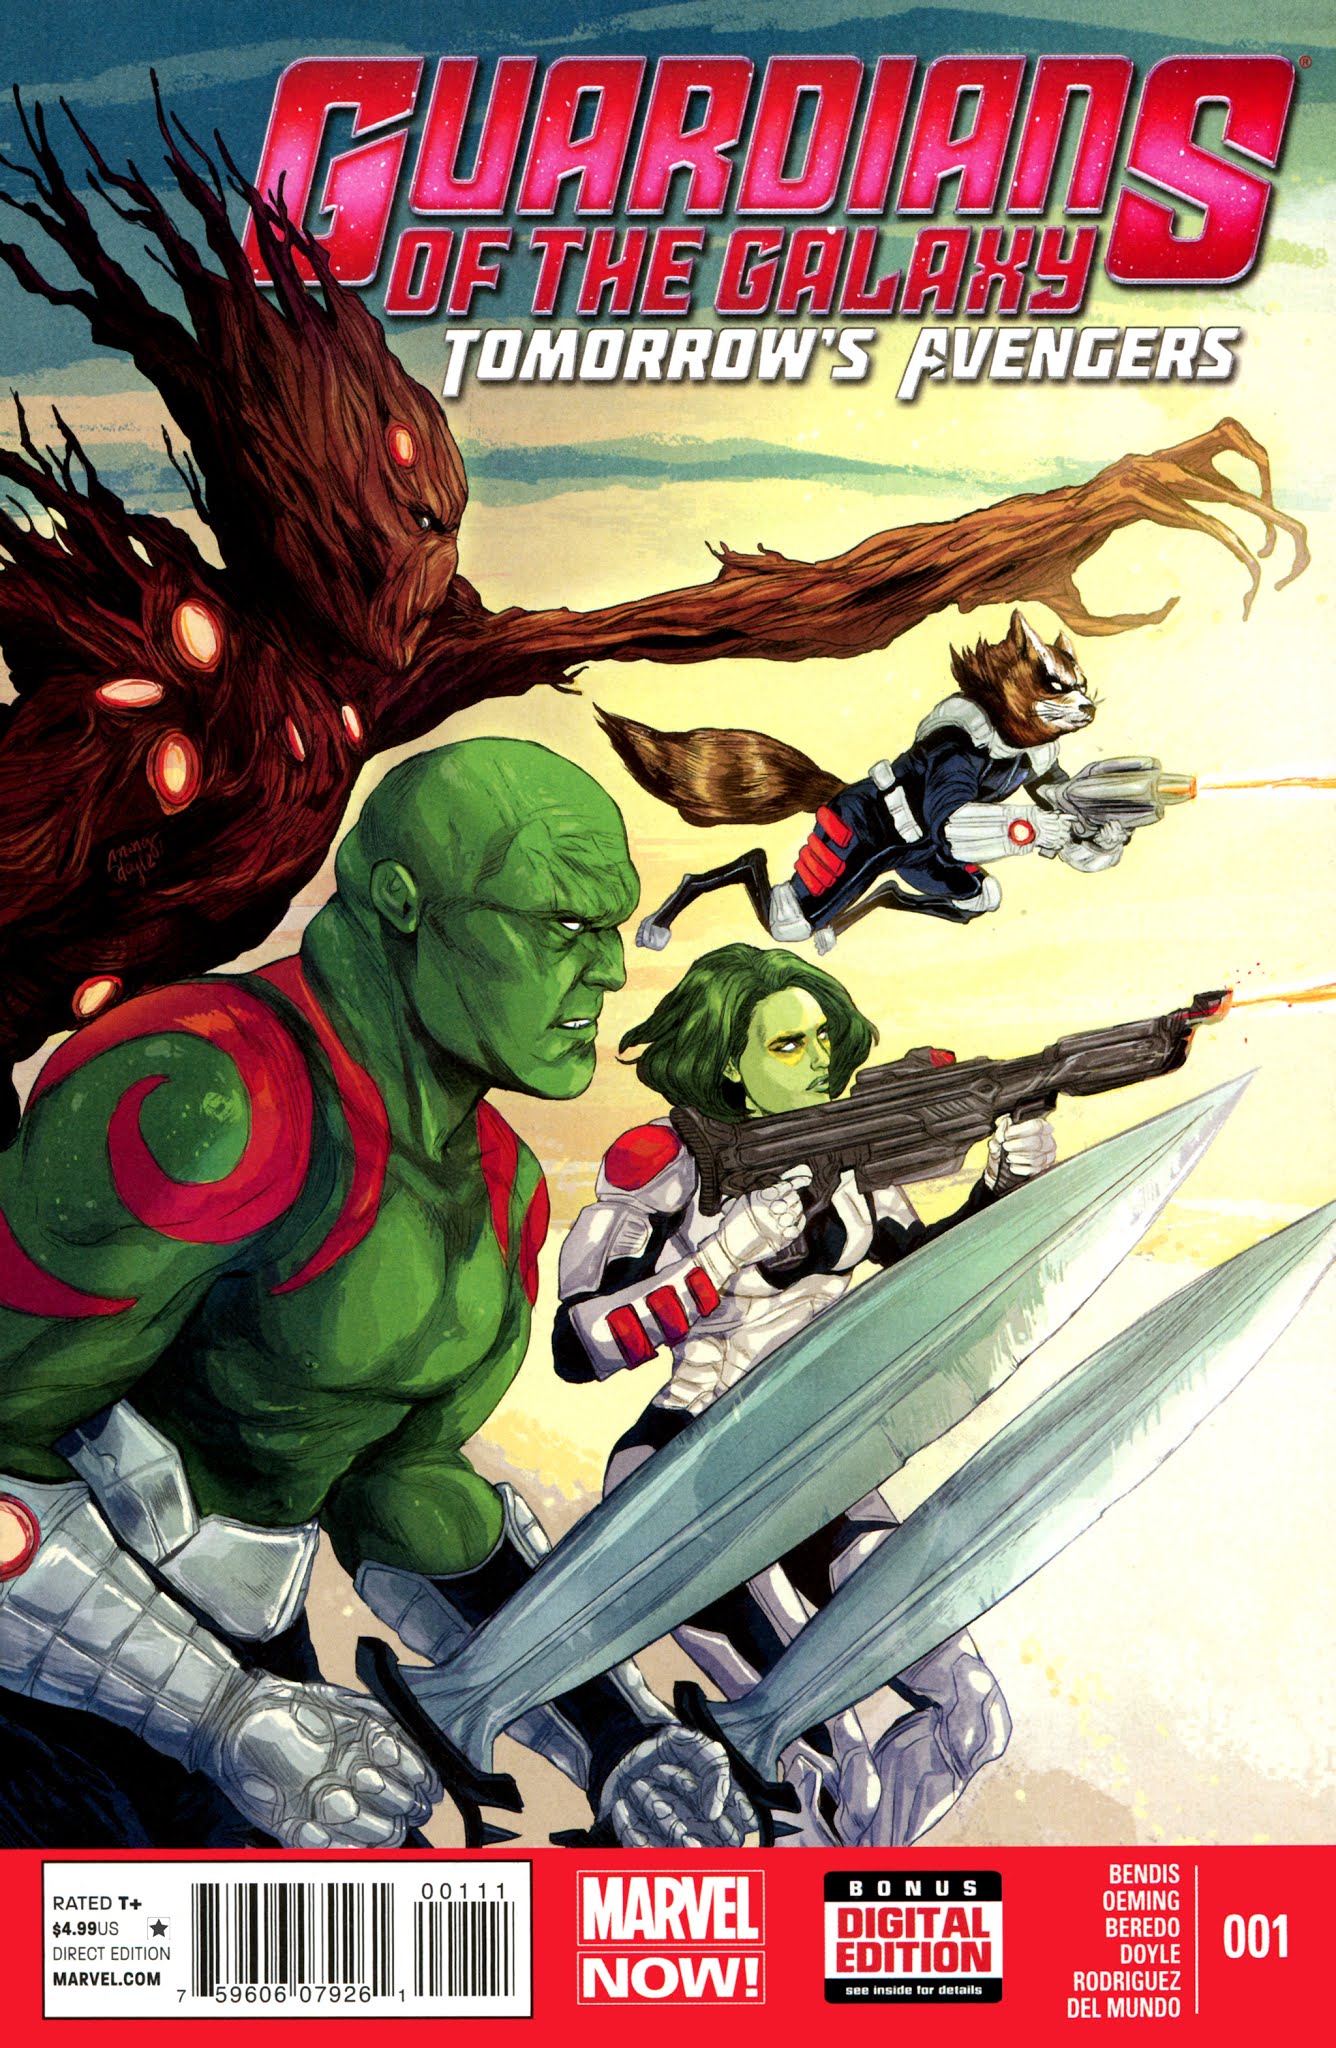 Read online Guardians of the Galaxy: Tomorrow's Avengers comic -  Issue # Full - 1